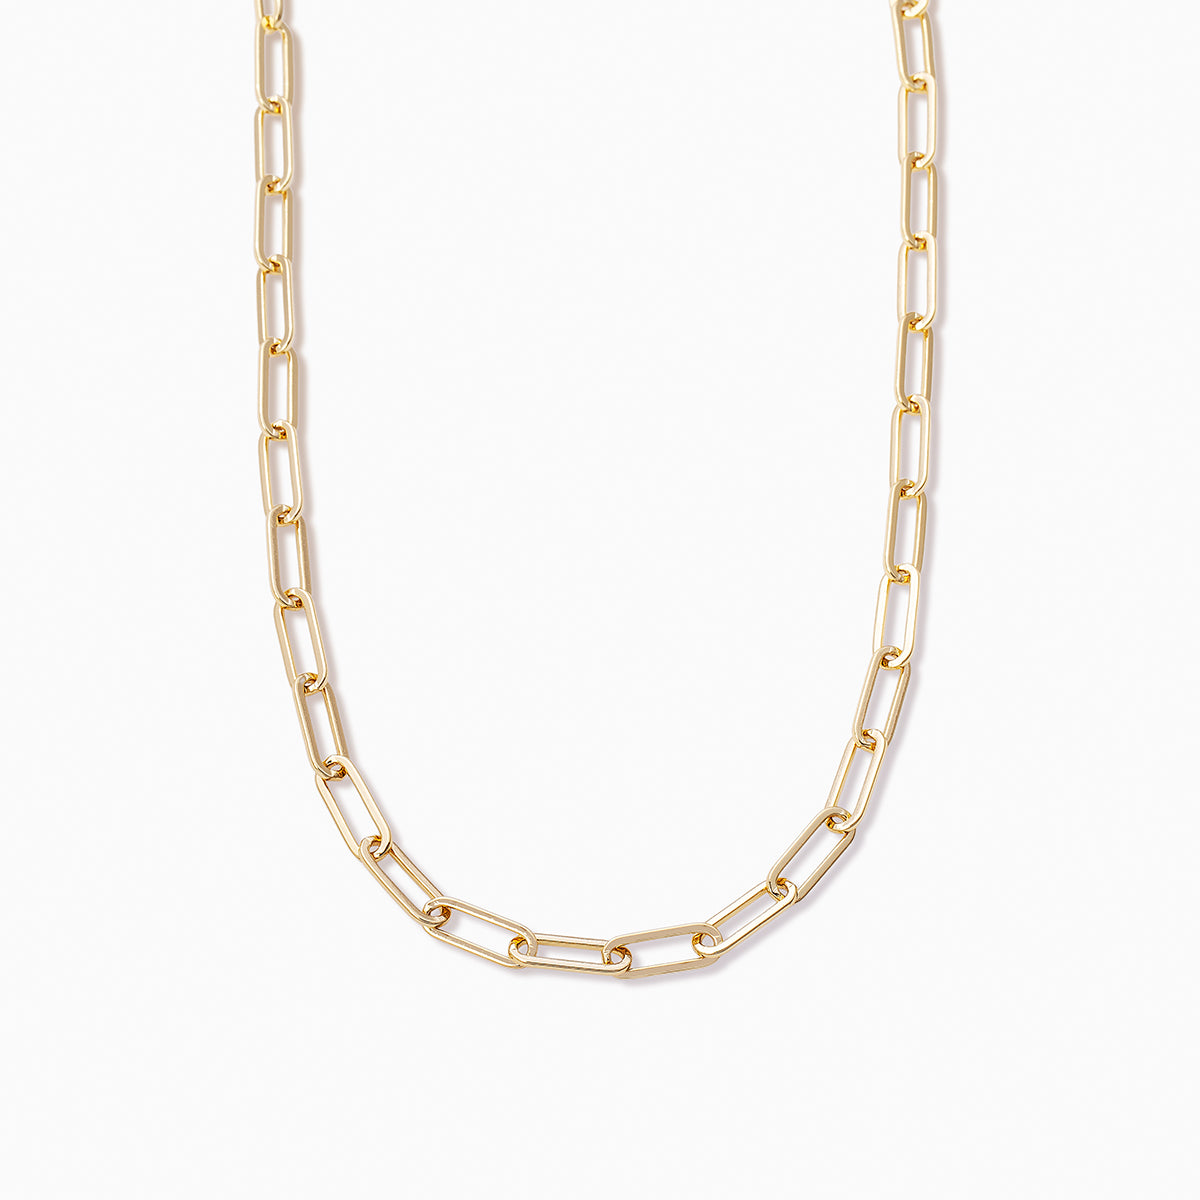 Linked Up Necklace | Gold | Product Image | Uncommon James